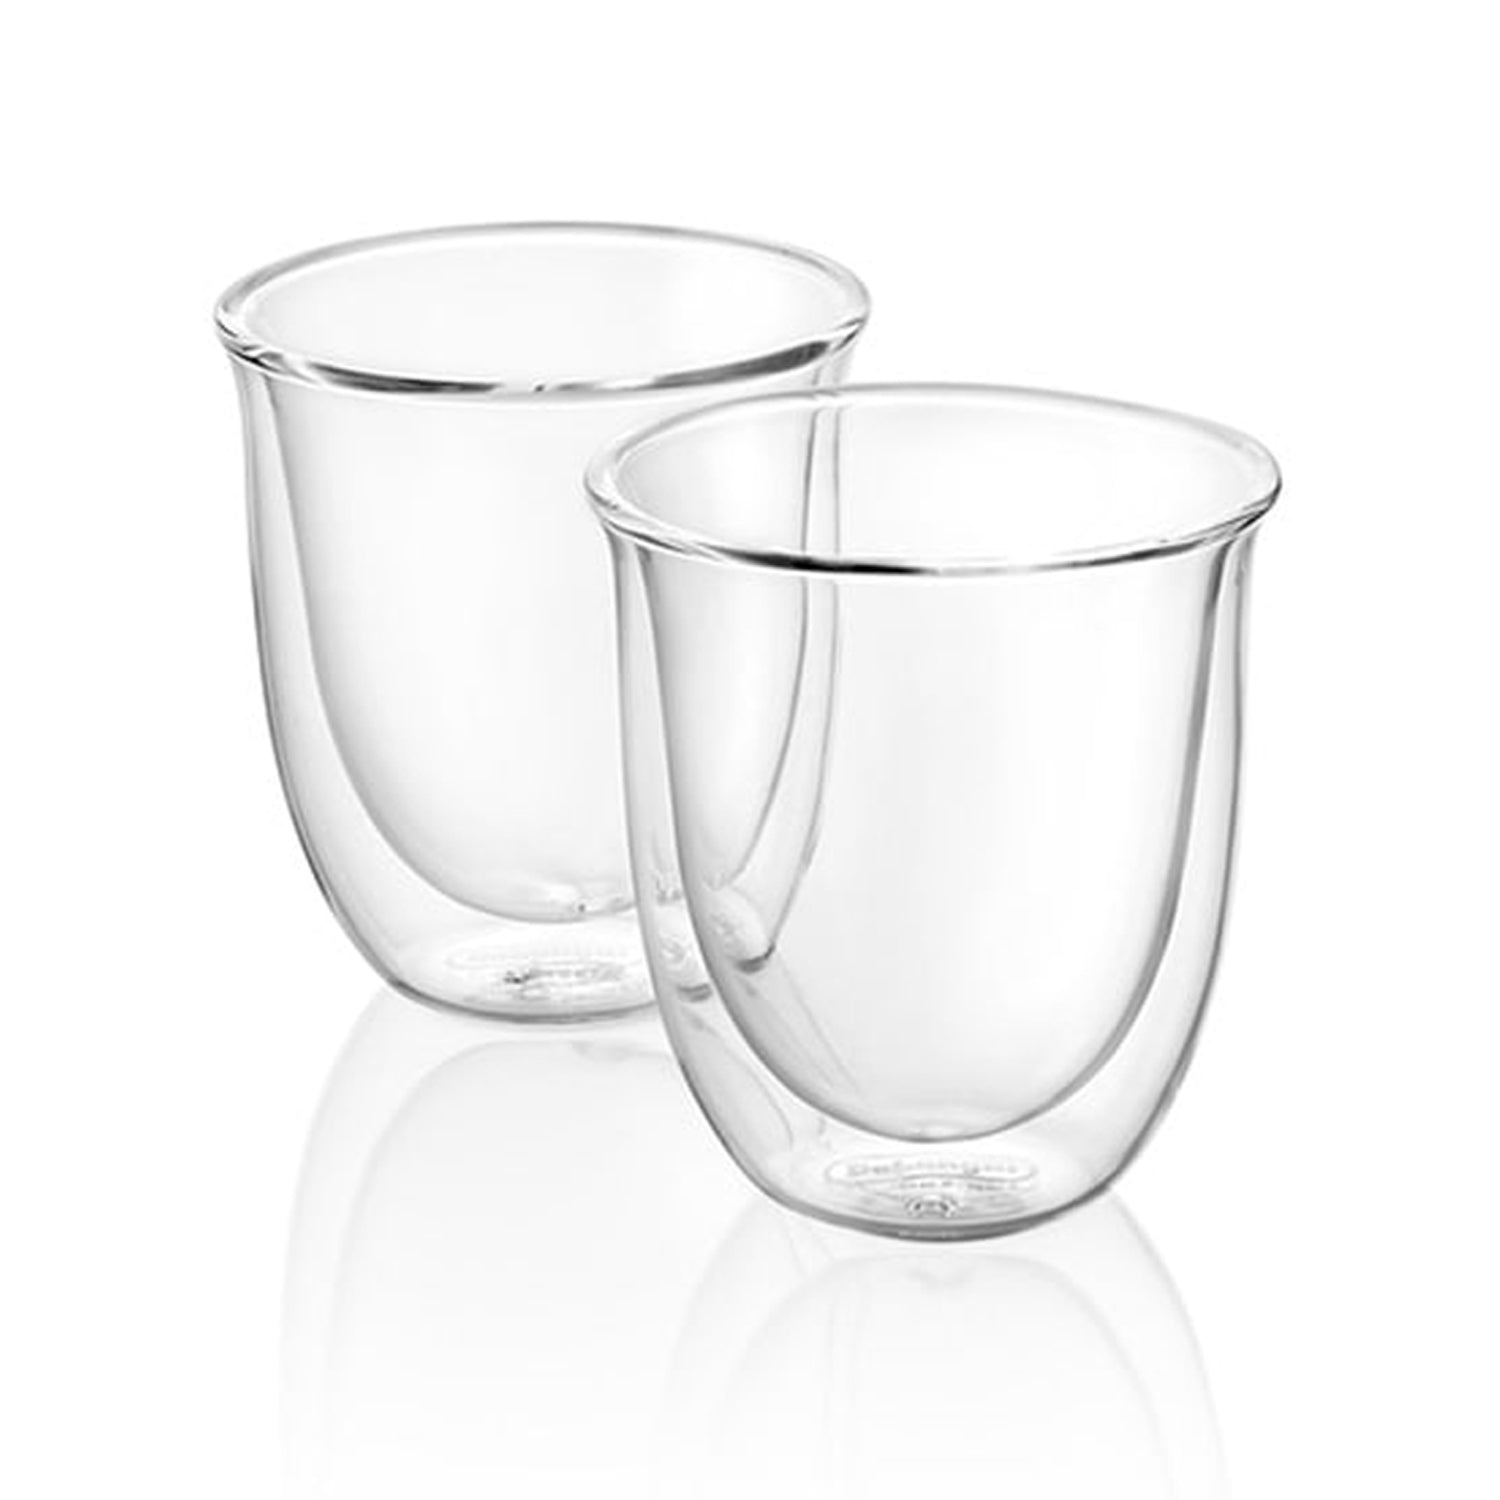 Blintope Cappuccino – Glass DeLonghi of Cups, Set 2 Bicchieri